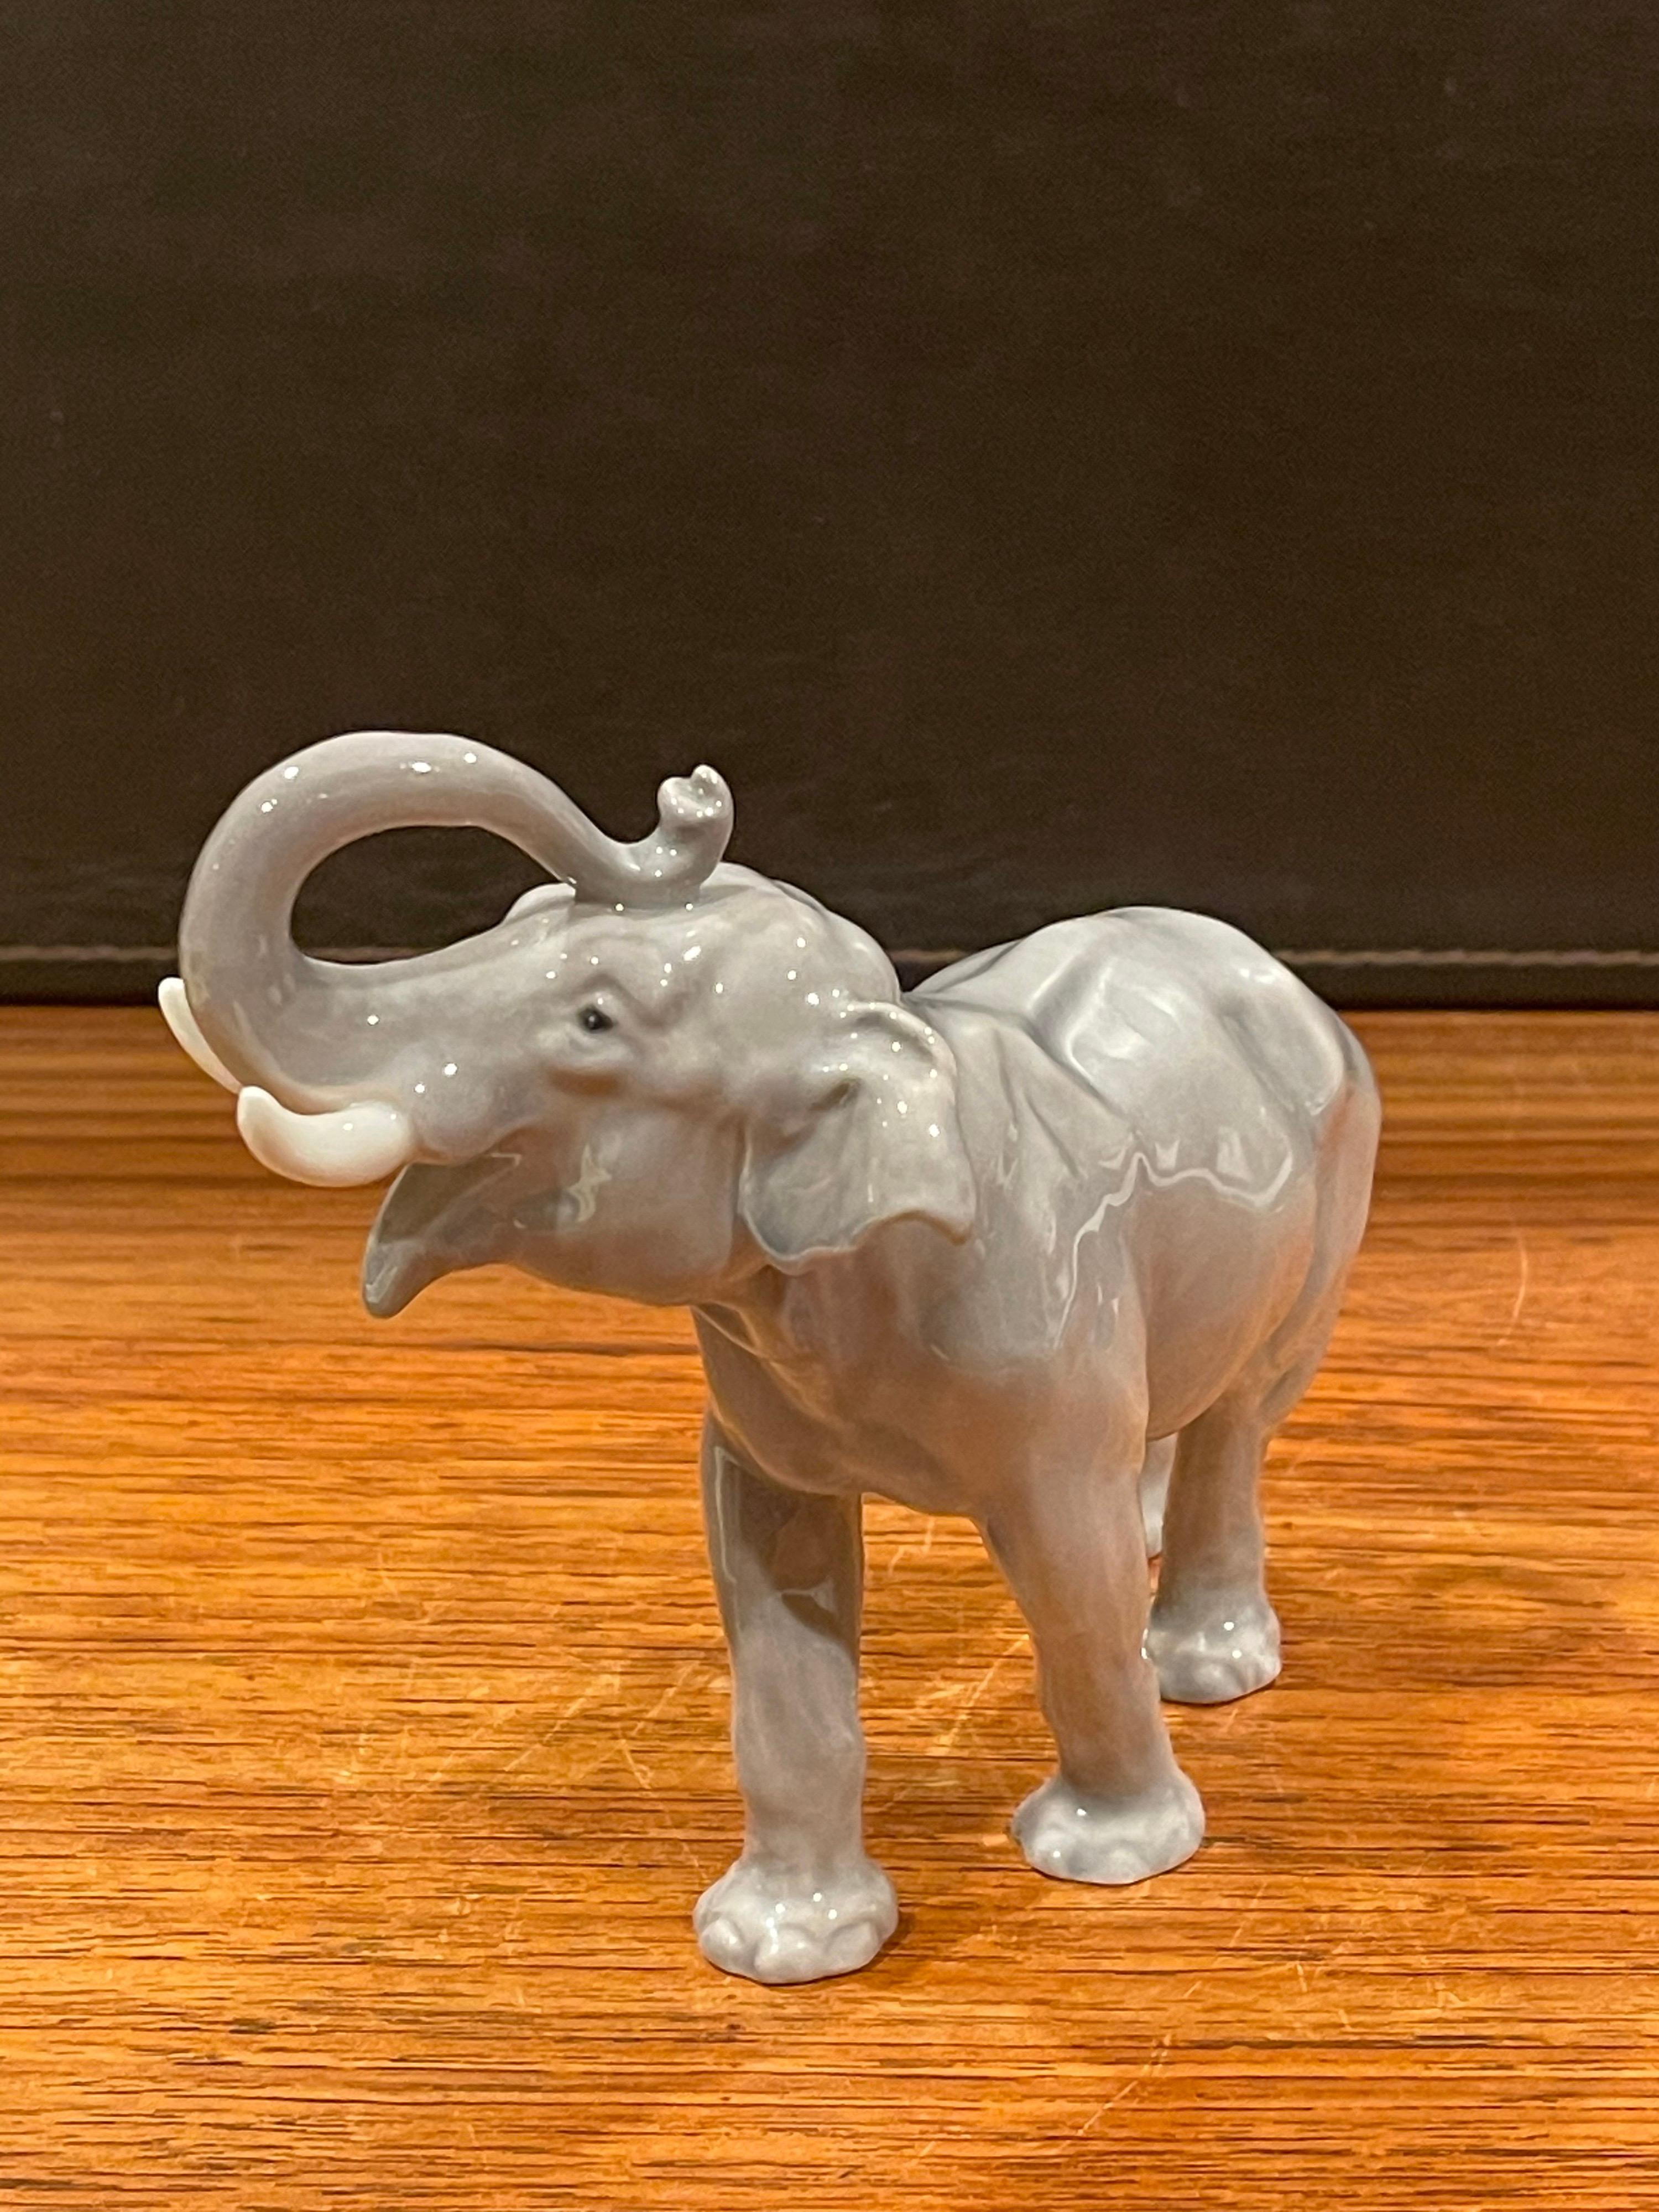 20th Century Hand Painted Porcelain Elephant Sculpture by Bing & Grondahl For Sale